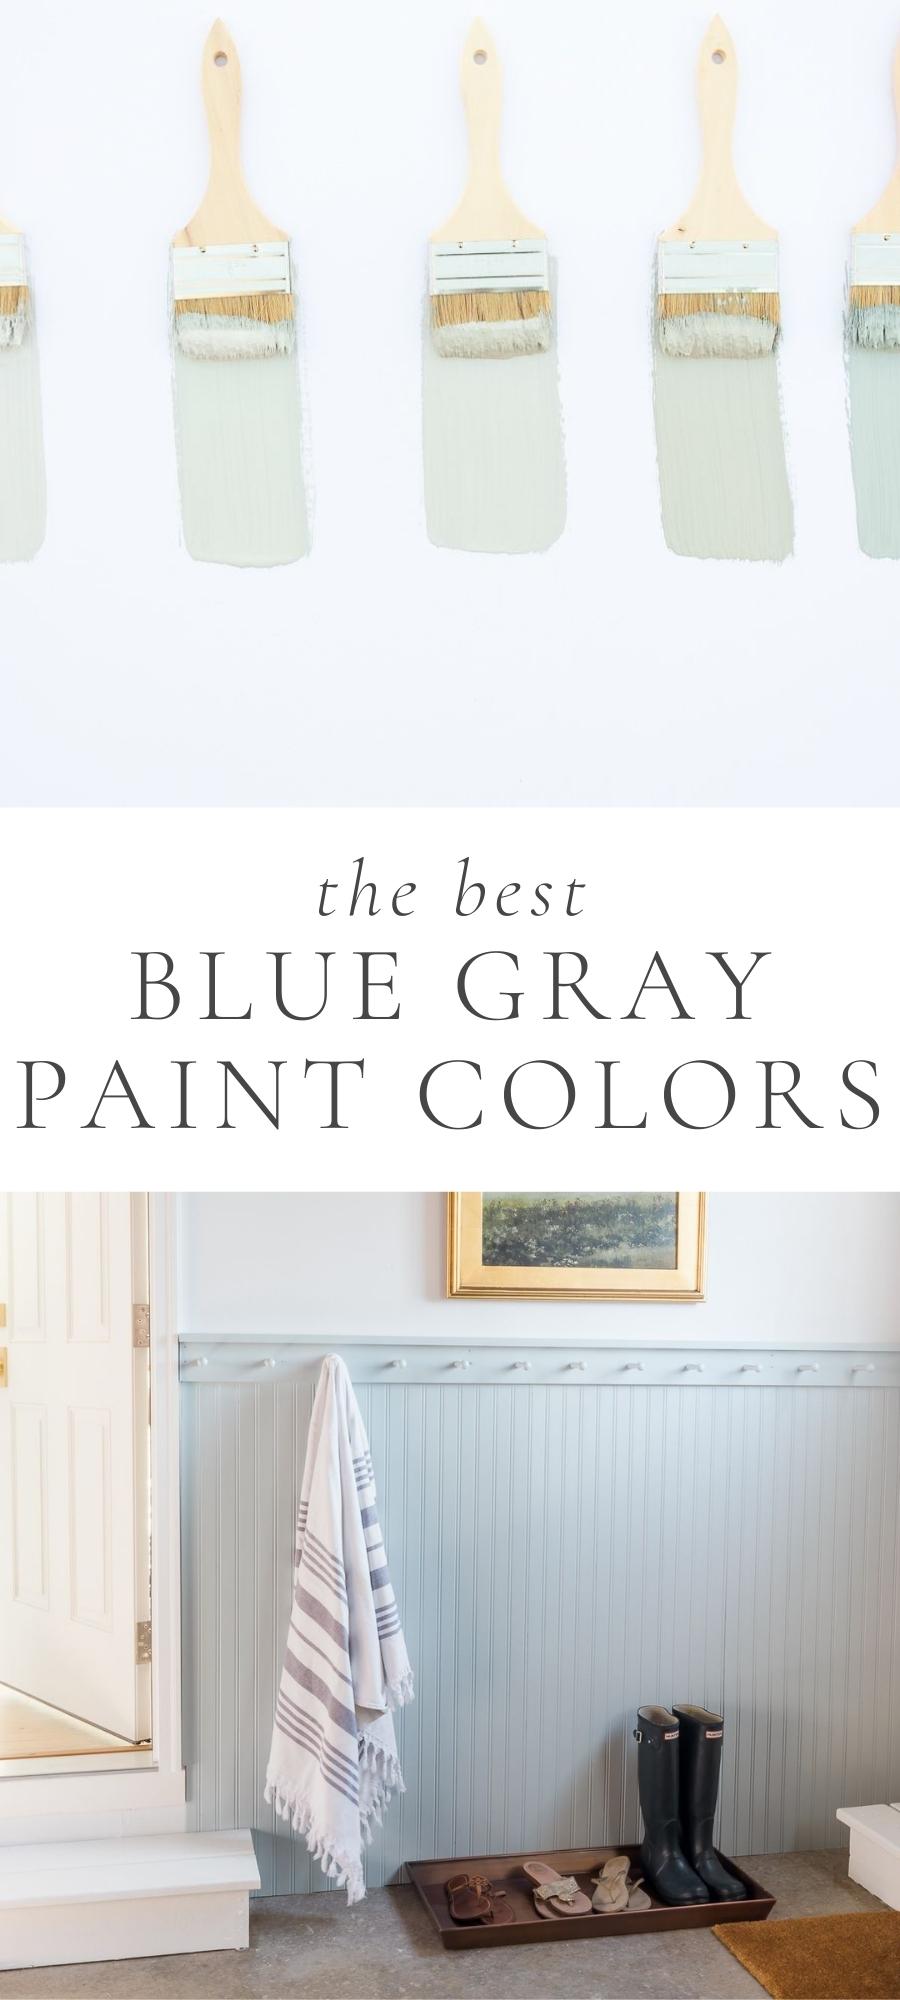 blue paint colors with brushes and mudroom with boots shoes and towel